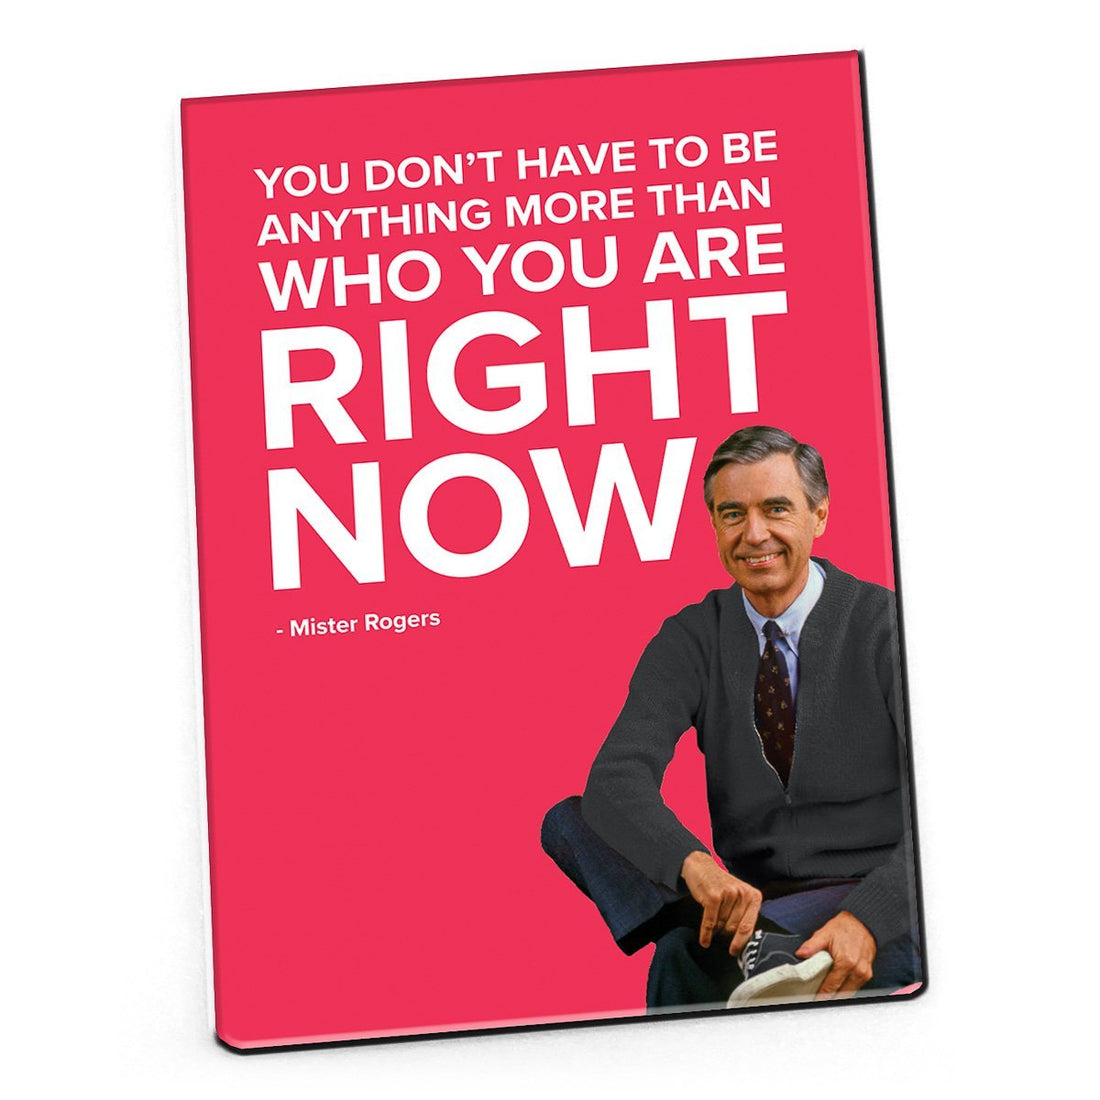 Mister Rogers Quote Magnet: "You Don't Have to Be Anything More"